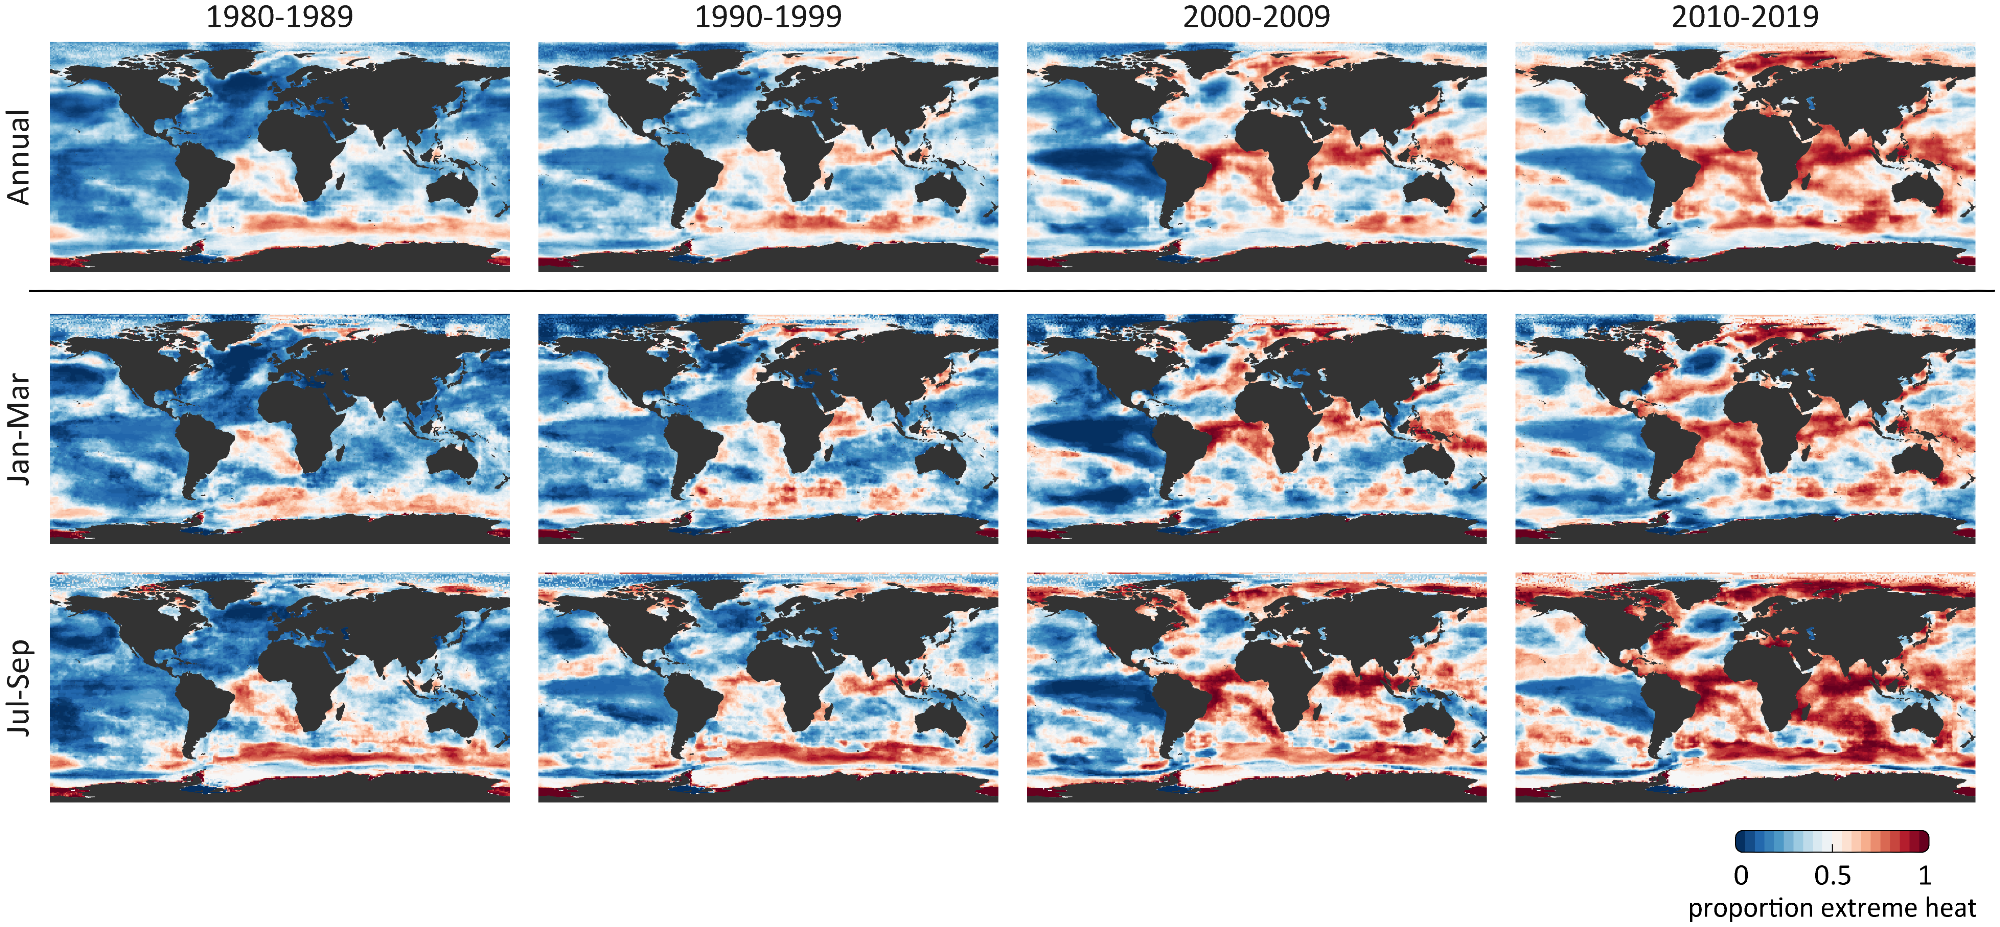 Decadal evolution of frequency of extreme marine heat from 1980–2019. Extreme heat defined as exceeding the localized (1° × 1°), monthly, 98th percentile of sea surface temperatures (SST) observed during 1870–1919, averaged from HadISSTv1.1 and COBESSTv2 products. Extreme heat, resolved for boreal winter (Jan-Mar) and summer (Jul-Sep), accumulates steadily over time beginning in the Southern, South Atlantic, and Indian basins. Regions of the mid North Atlantic and eastern South Pacific indicate a low occurrence. The base map layer was drawn using the “rworldmap” R package